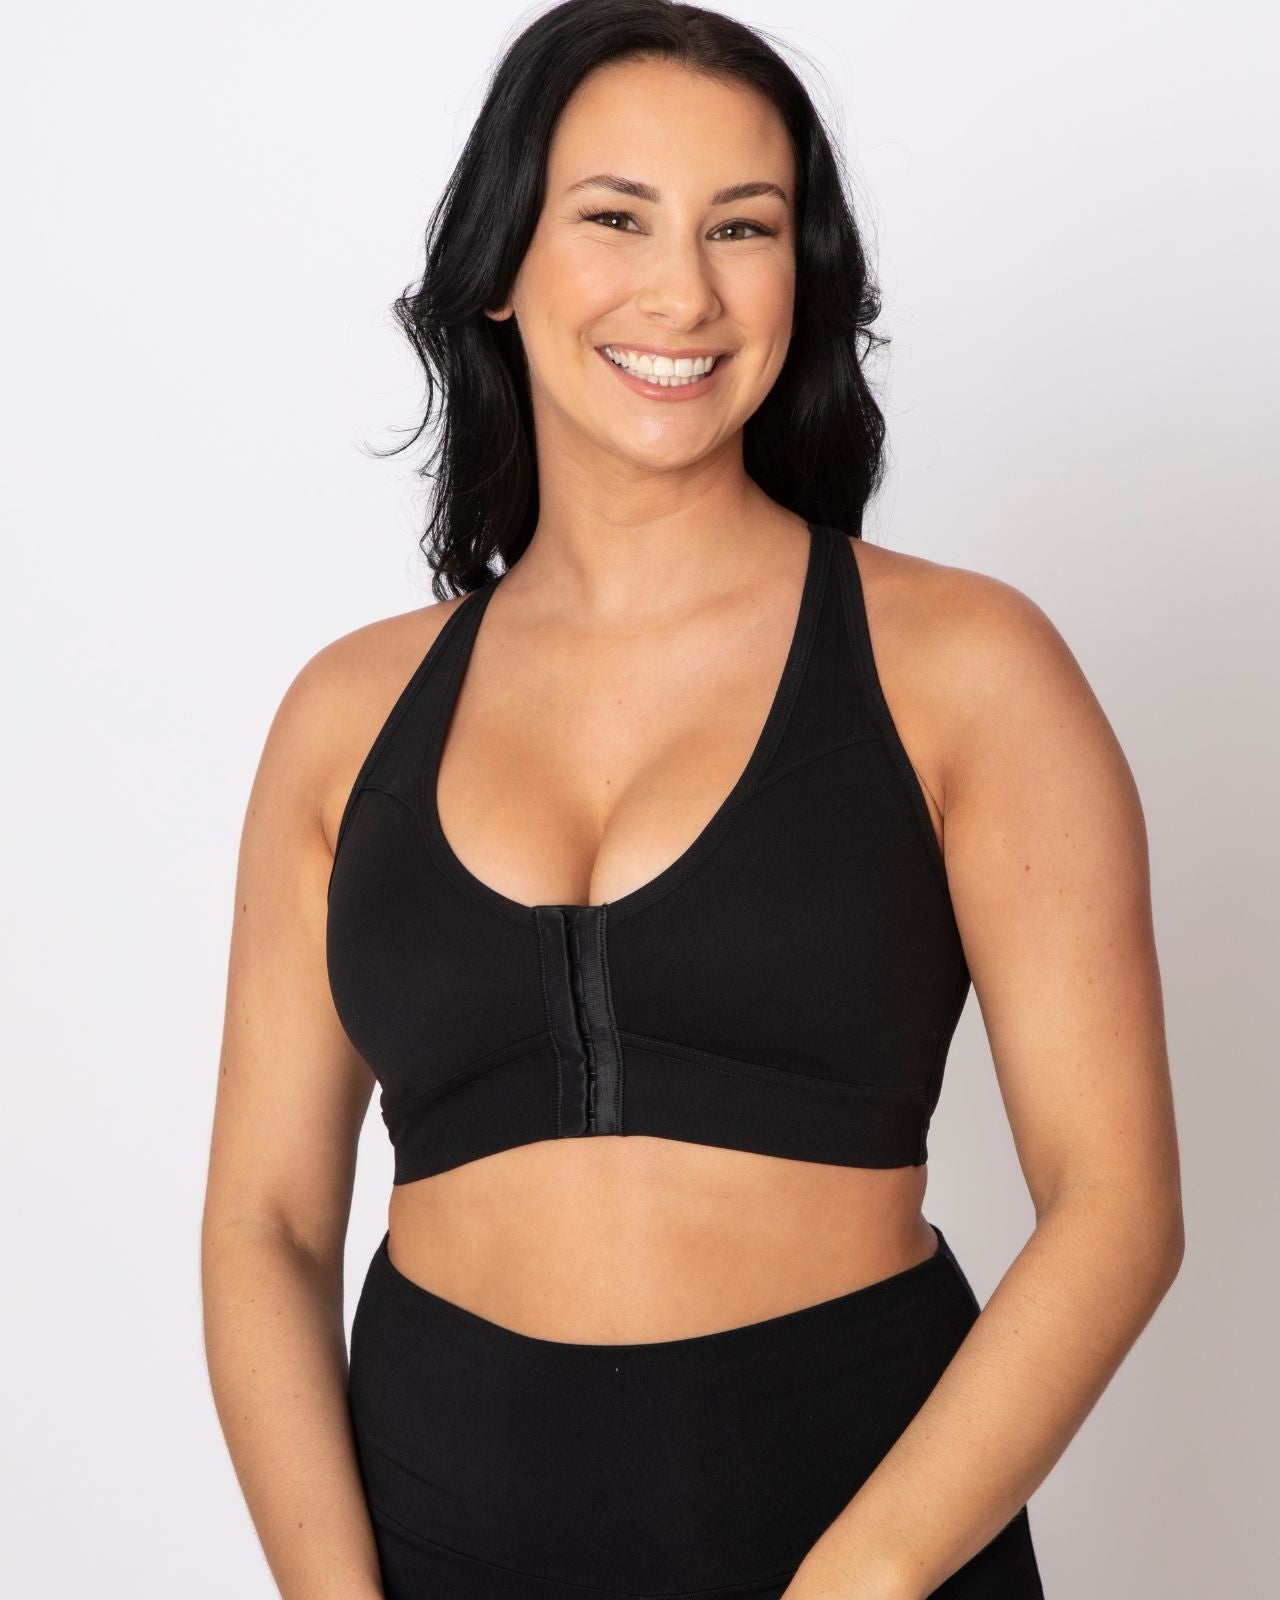 Classic Bra with Inner Pockets and front zip, BNRZ